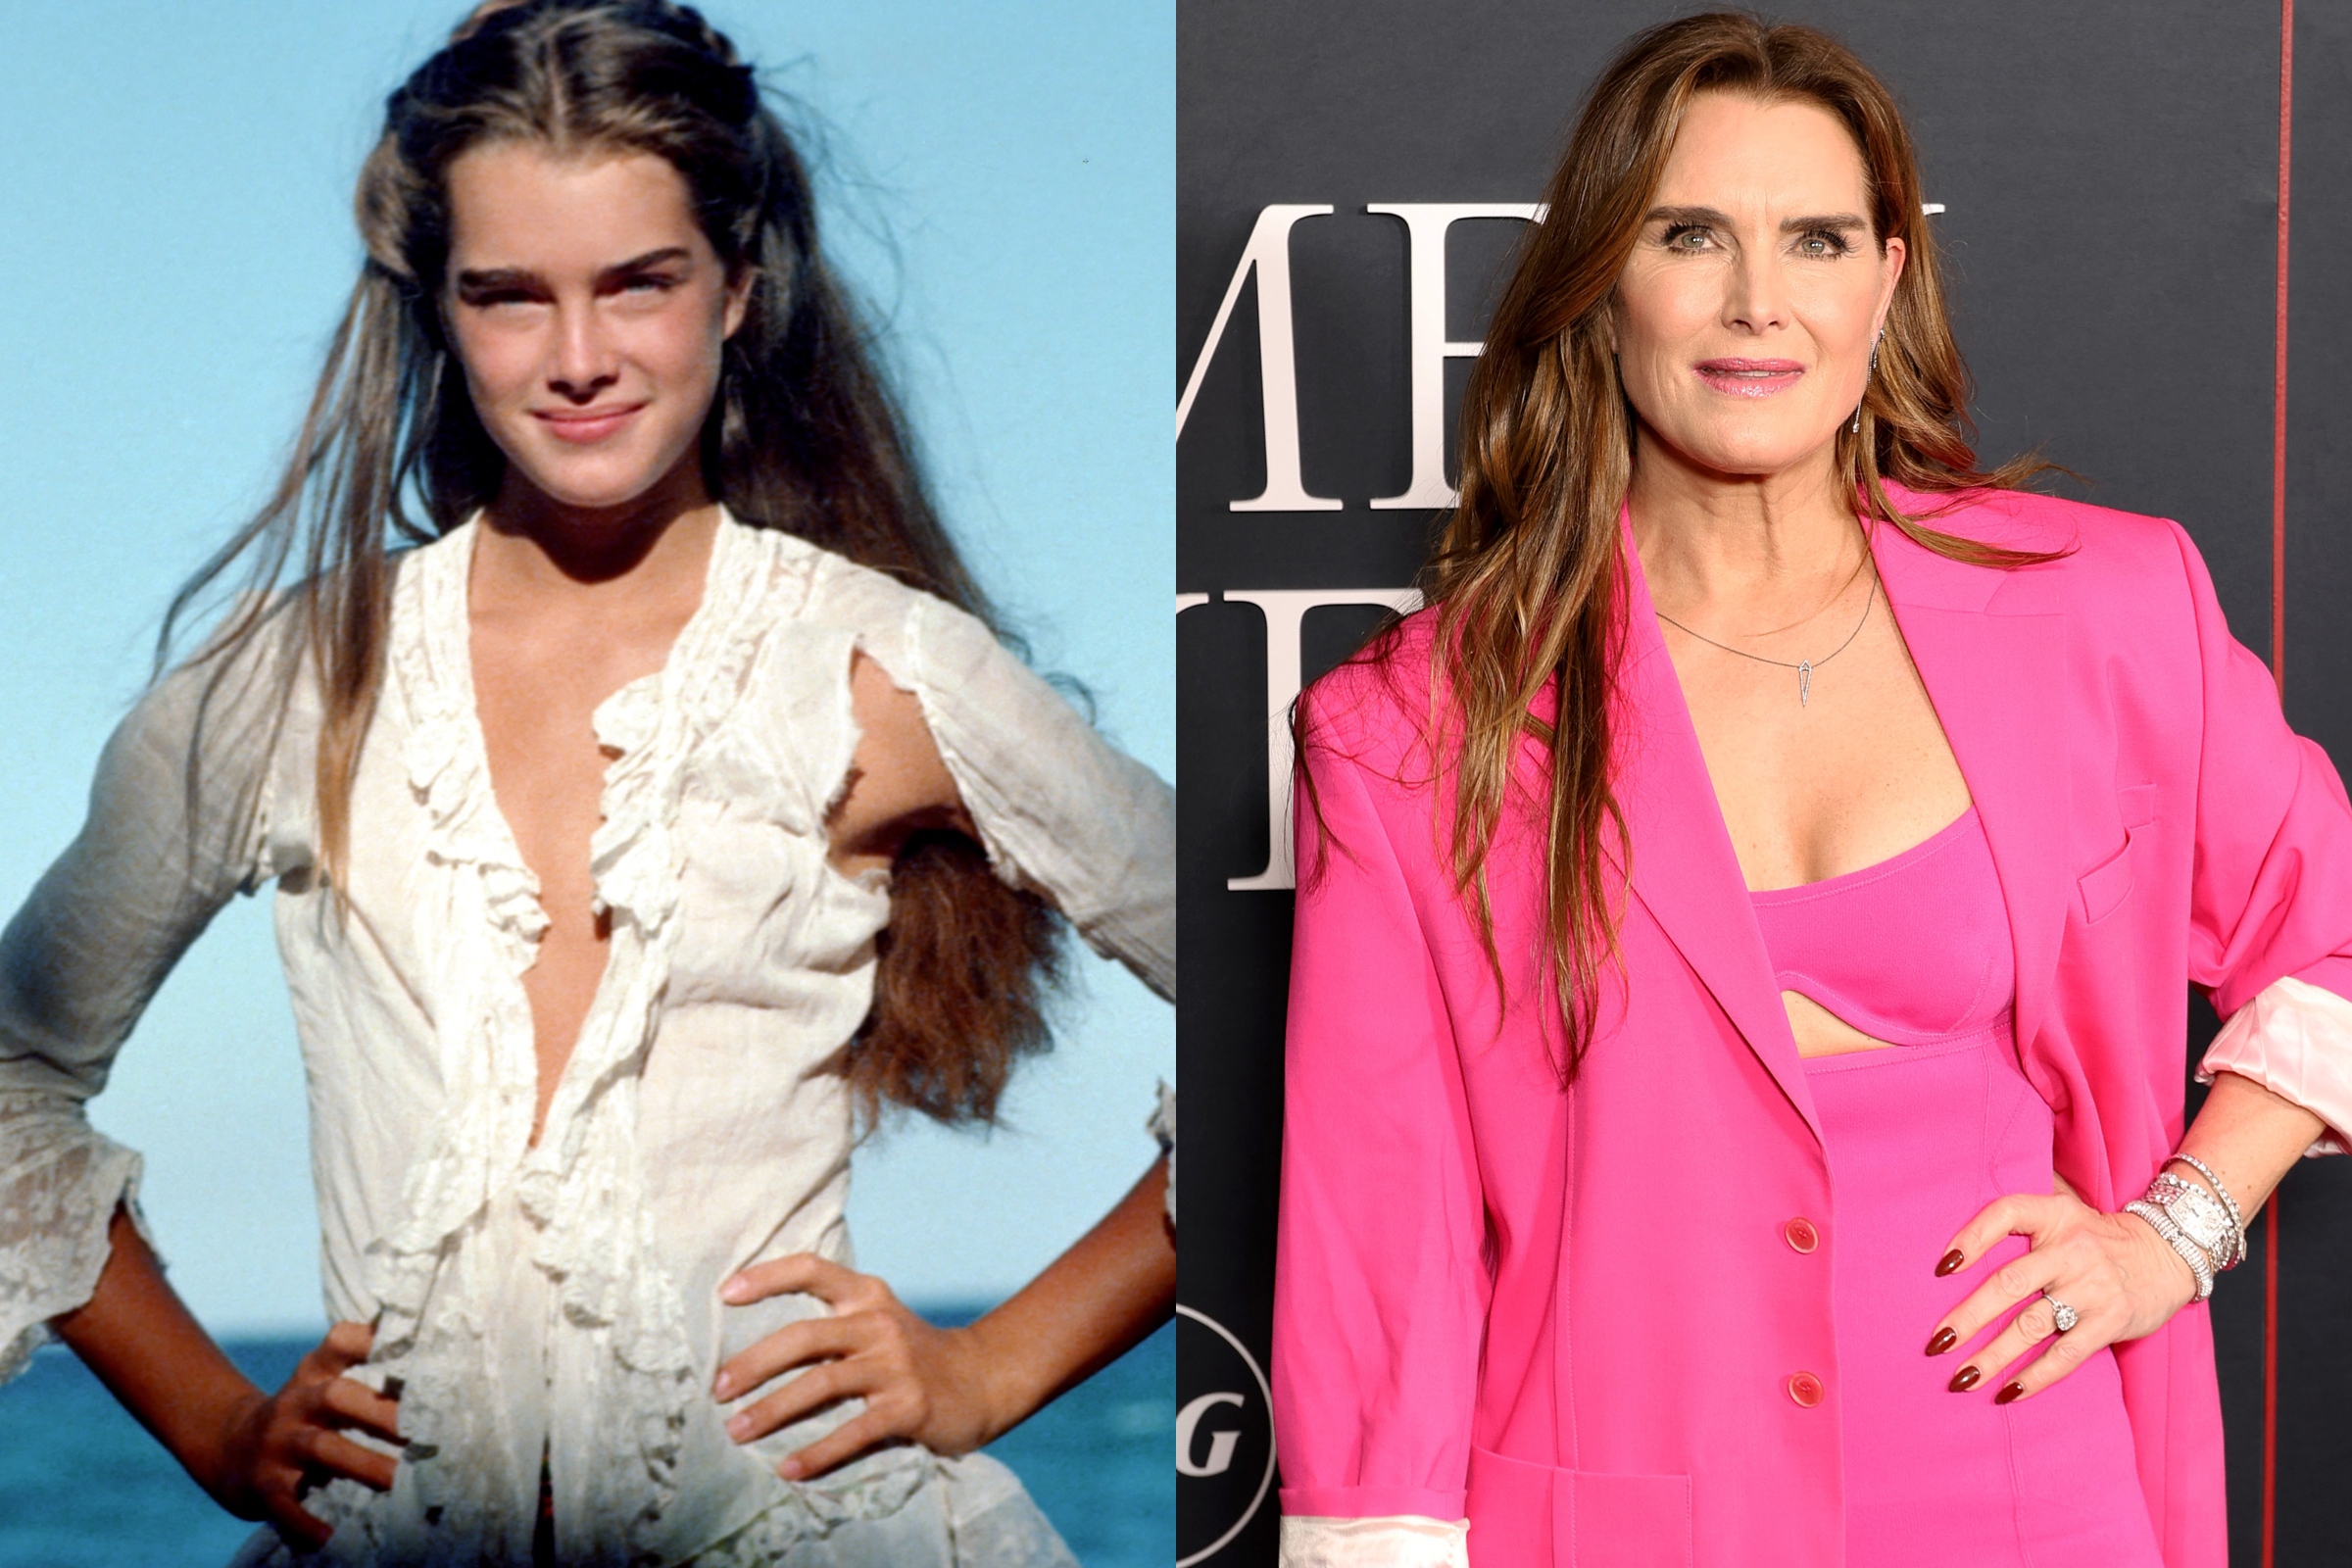 Brooke Shields Sexualization as a Child Was Staggering